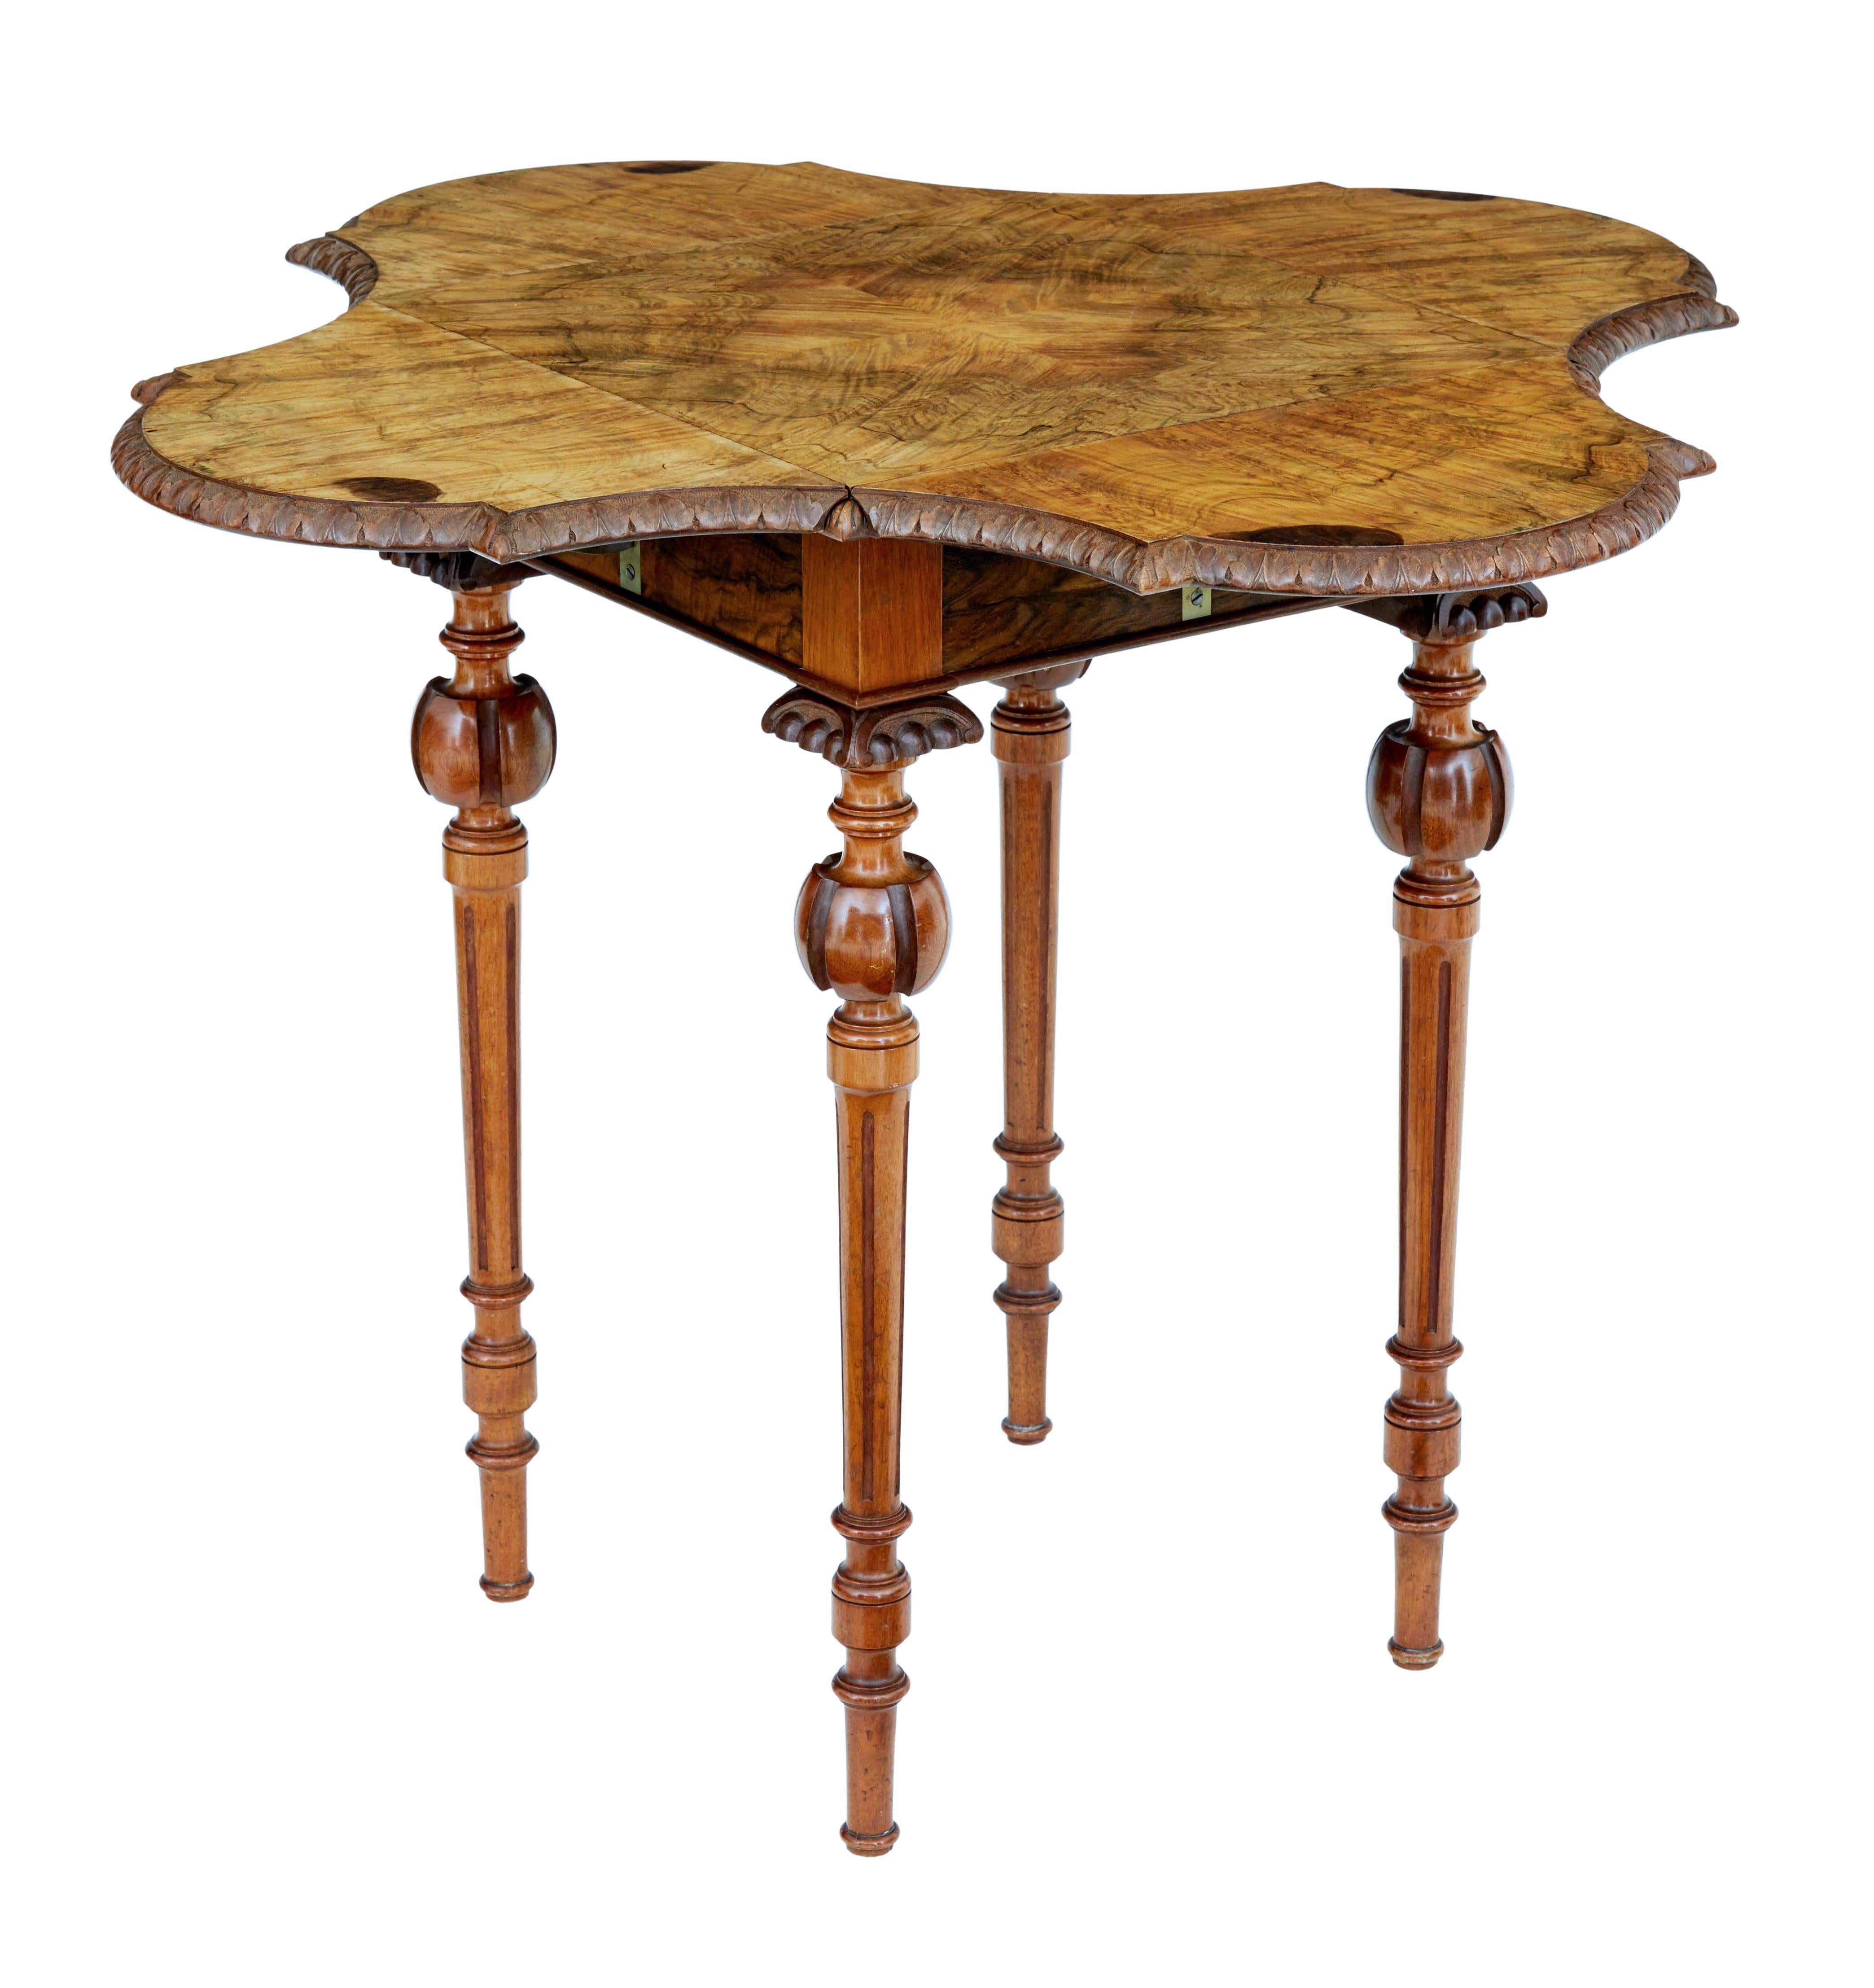 Beautiful quality carved walnut occasional table, circa 1870.

Stamped by Swedish maker Johan Ottergren Stockholm Jakobs Bergsgaten on the underside.

Burr walnut top with matched veneers, drop down leaves pull out / pull-out and fix in place to